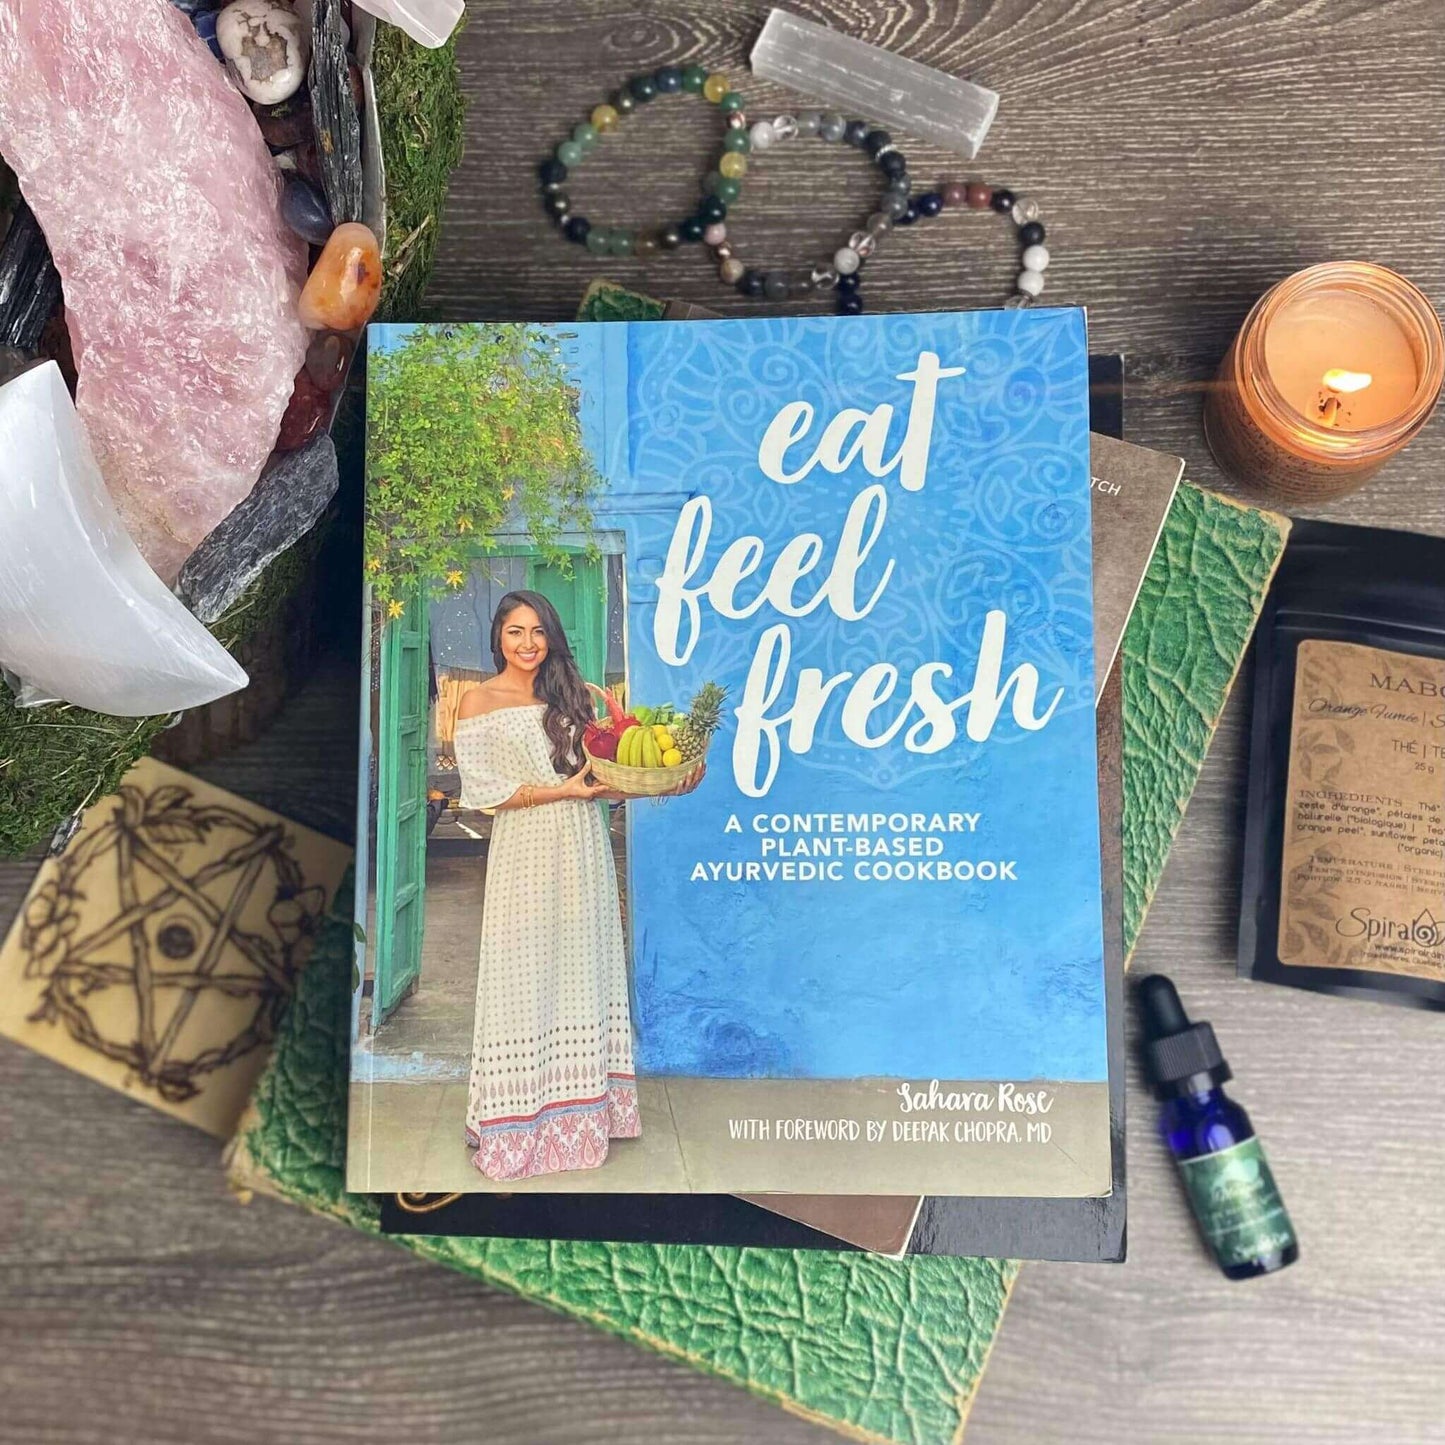 EAT FEEL FRESH: A CONTEMPORARY, PLANT-BASED AYURVEDIC COOKBOOK at $25.99 only from Spiral Rain